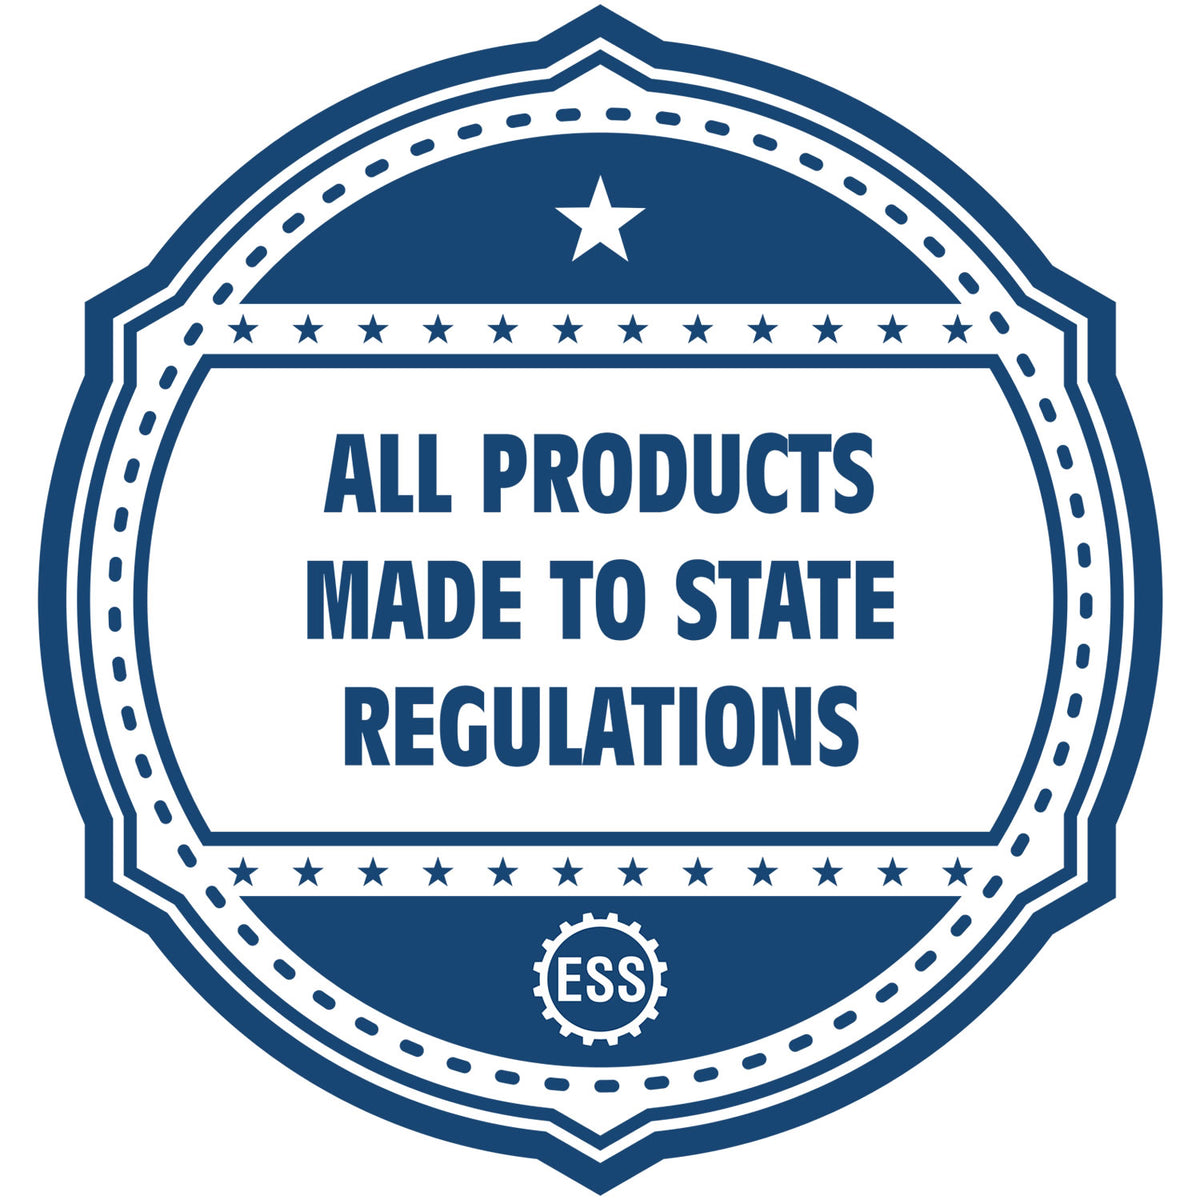 An icon or badge element for the Slim Pre-Inked State Seal Notary Stamp for New Hampshire showing that this product is made in compliance with state regulations.